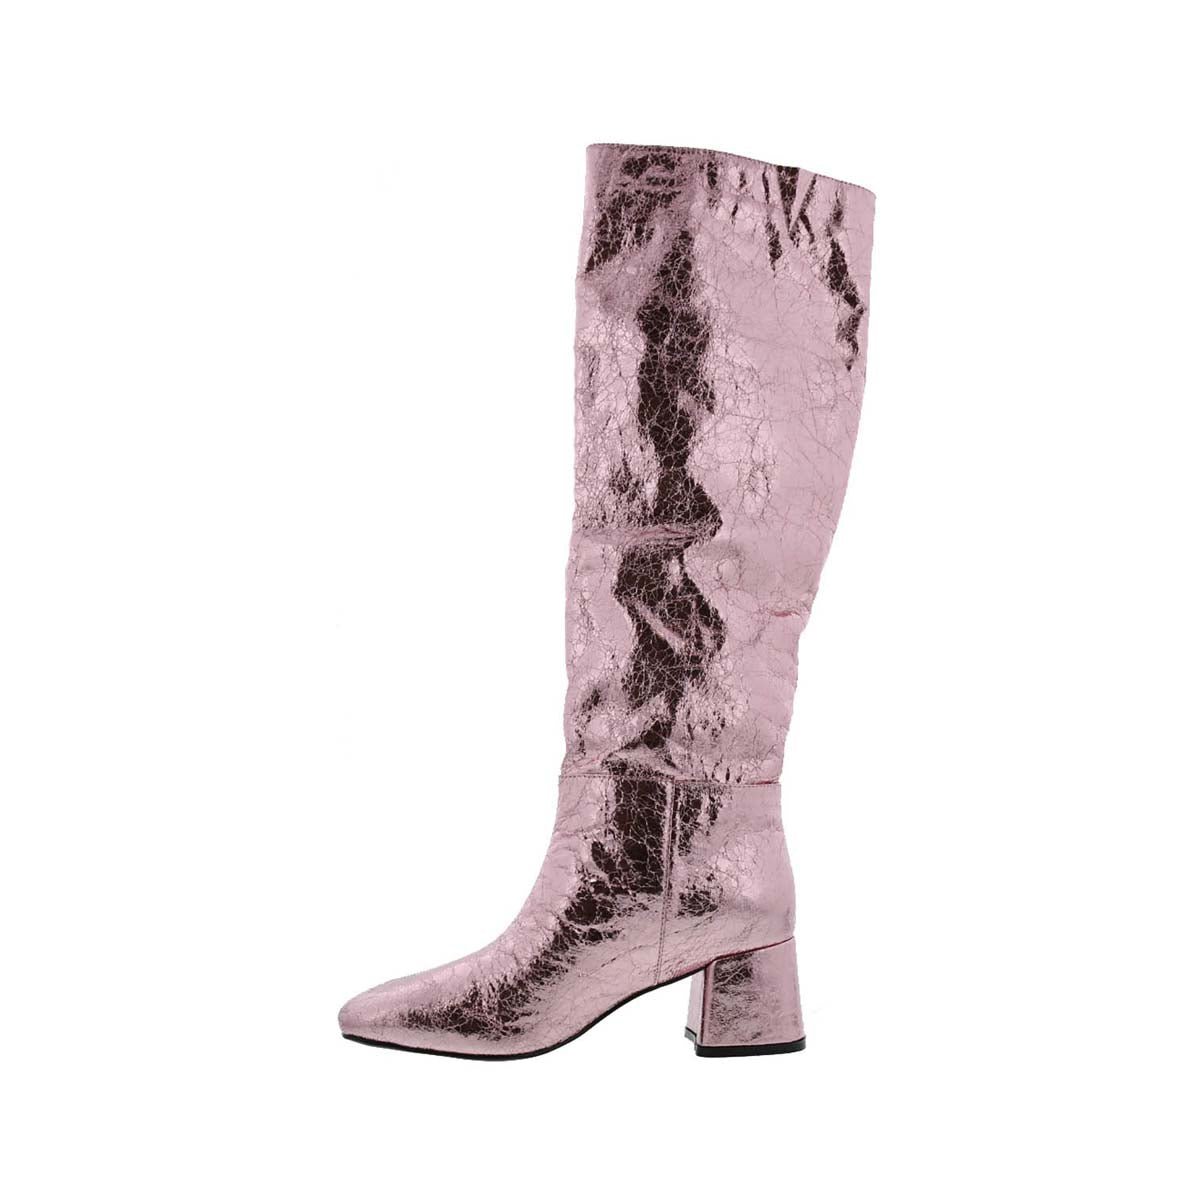 BELLINI REMI WOMEN KNEE HIGH BOOTS IN PINK METALLIC CRINKLE - TLW Shoes